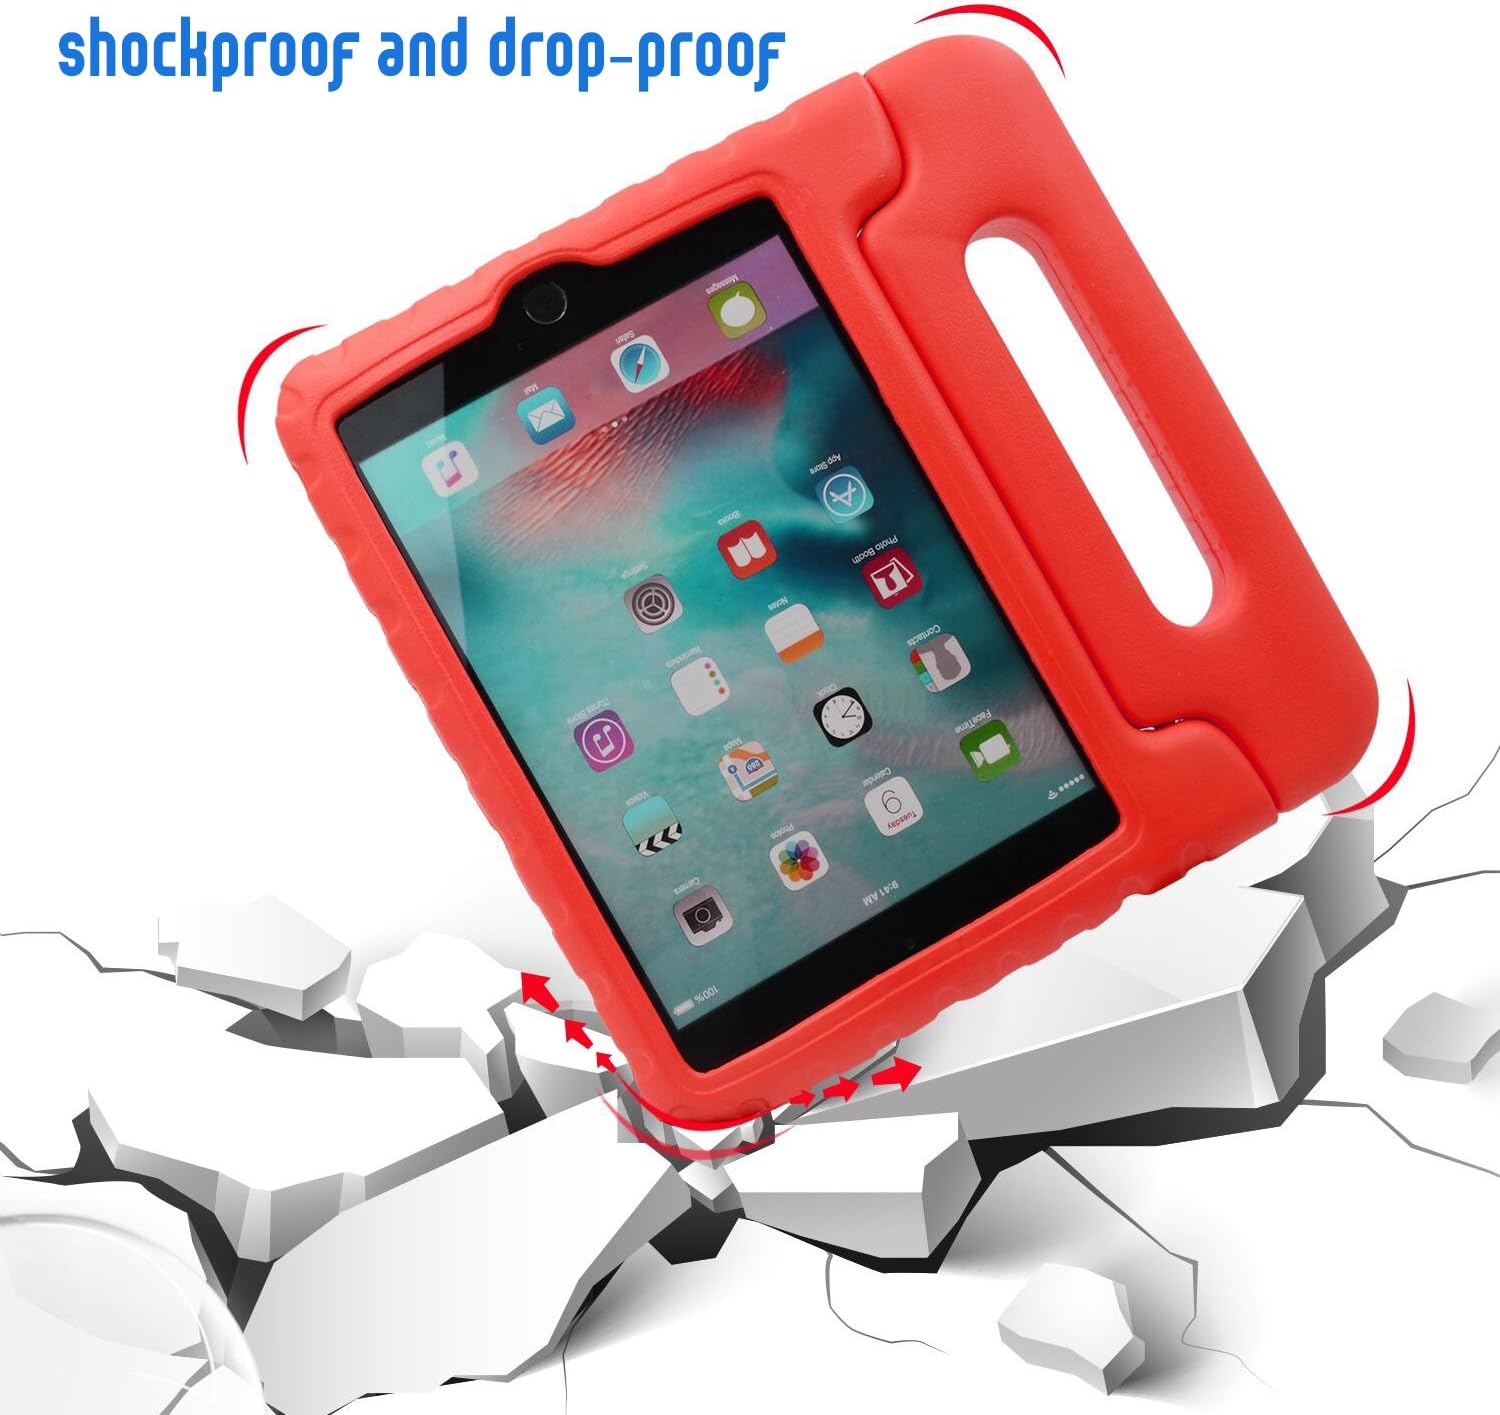 Shockproof Handle case with Stand for iPad Mini 1/2/3/4/5 with 7.9 inch Screen (RED)